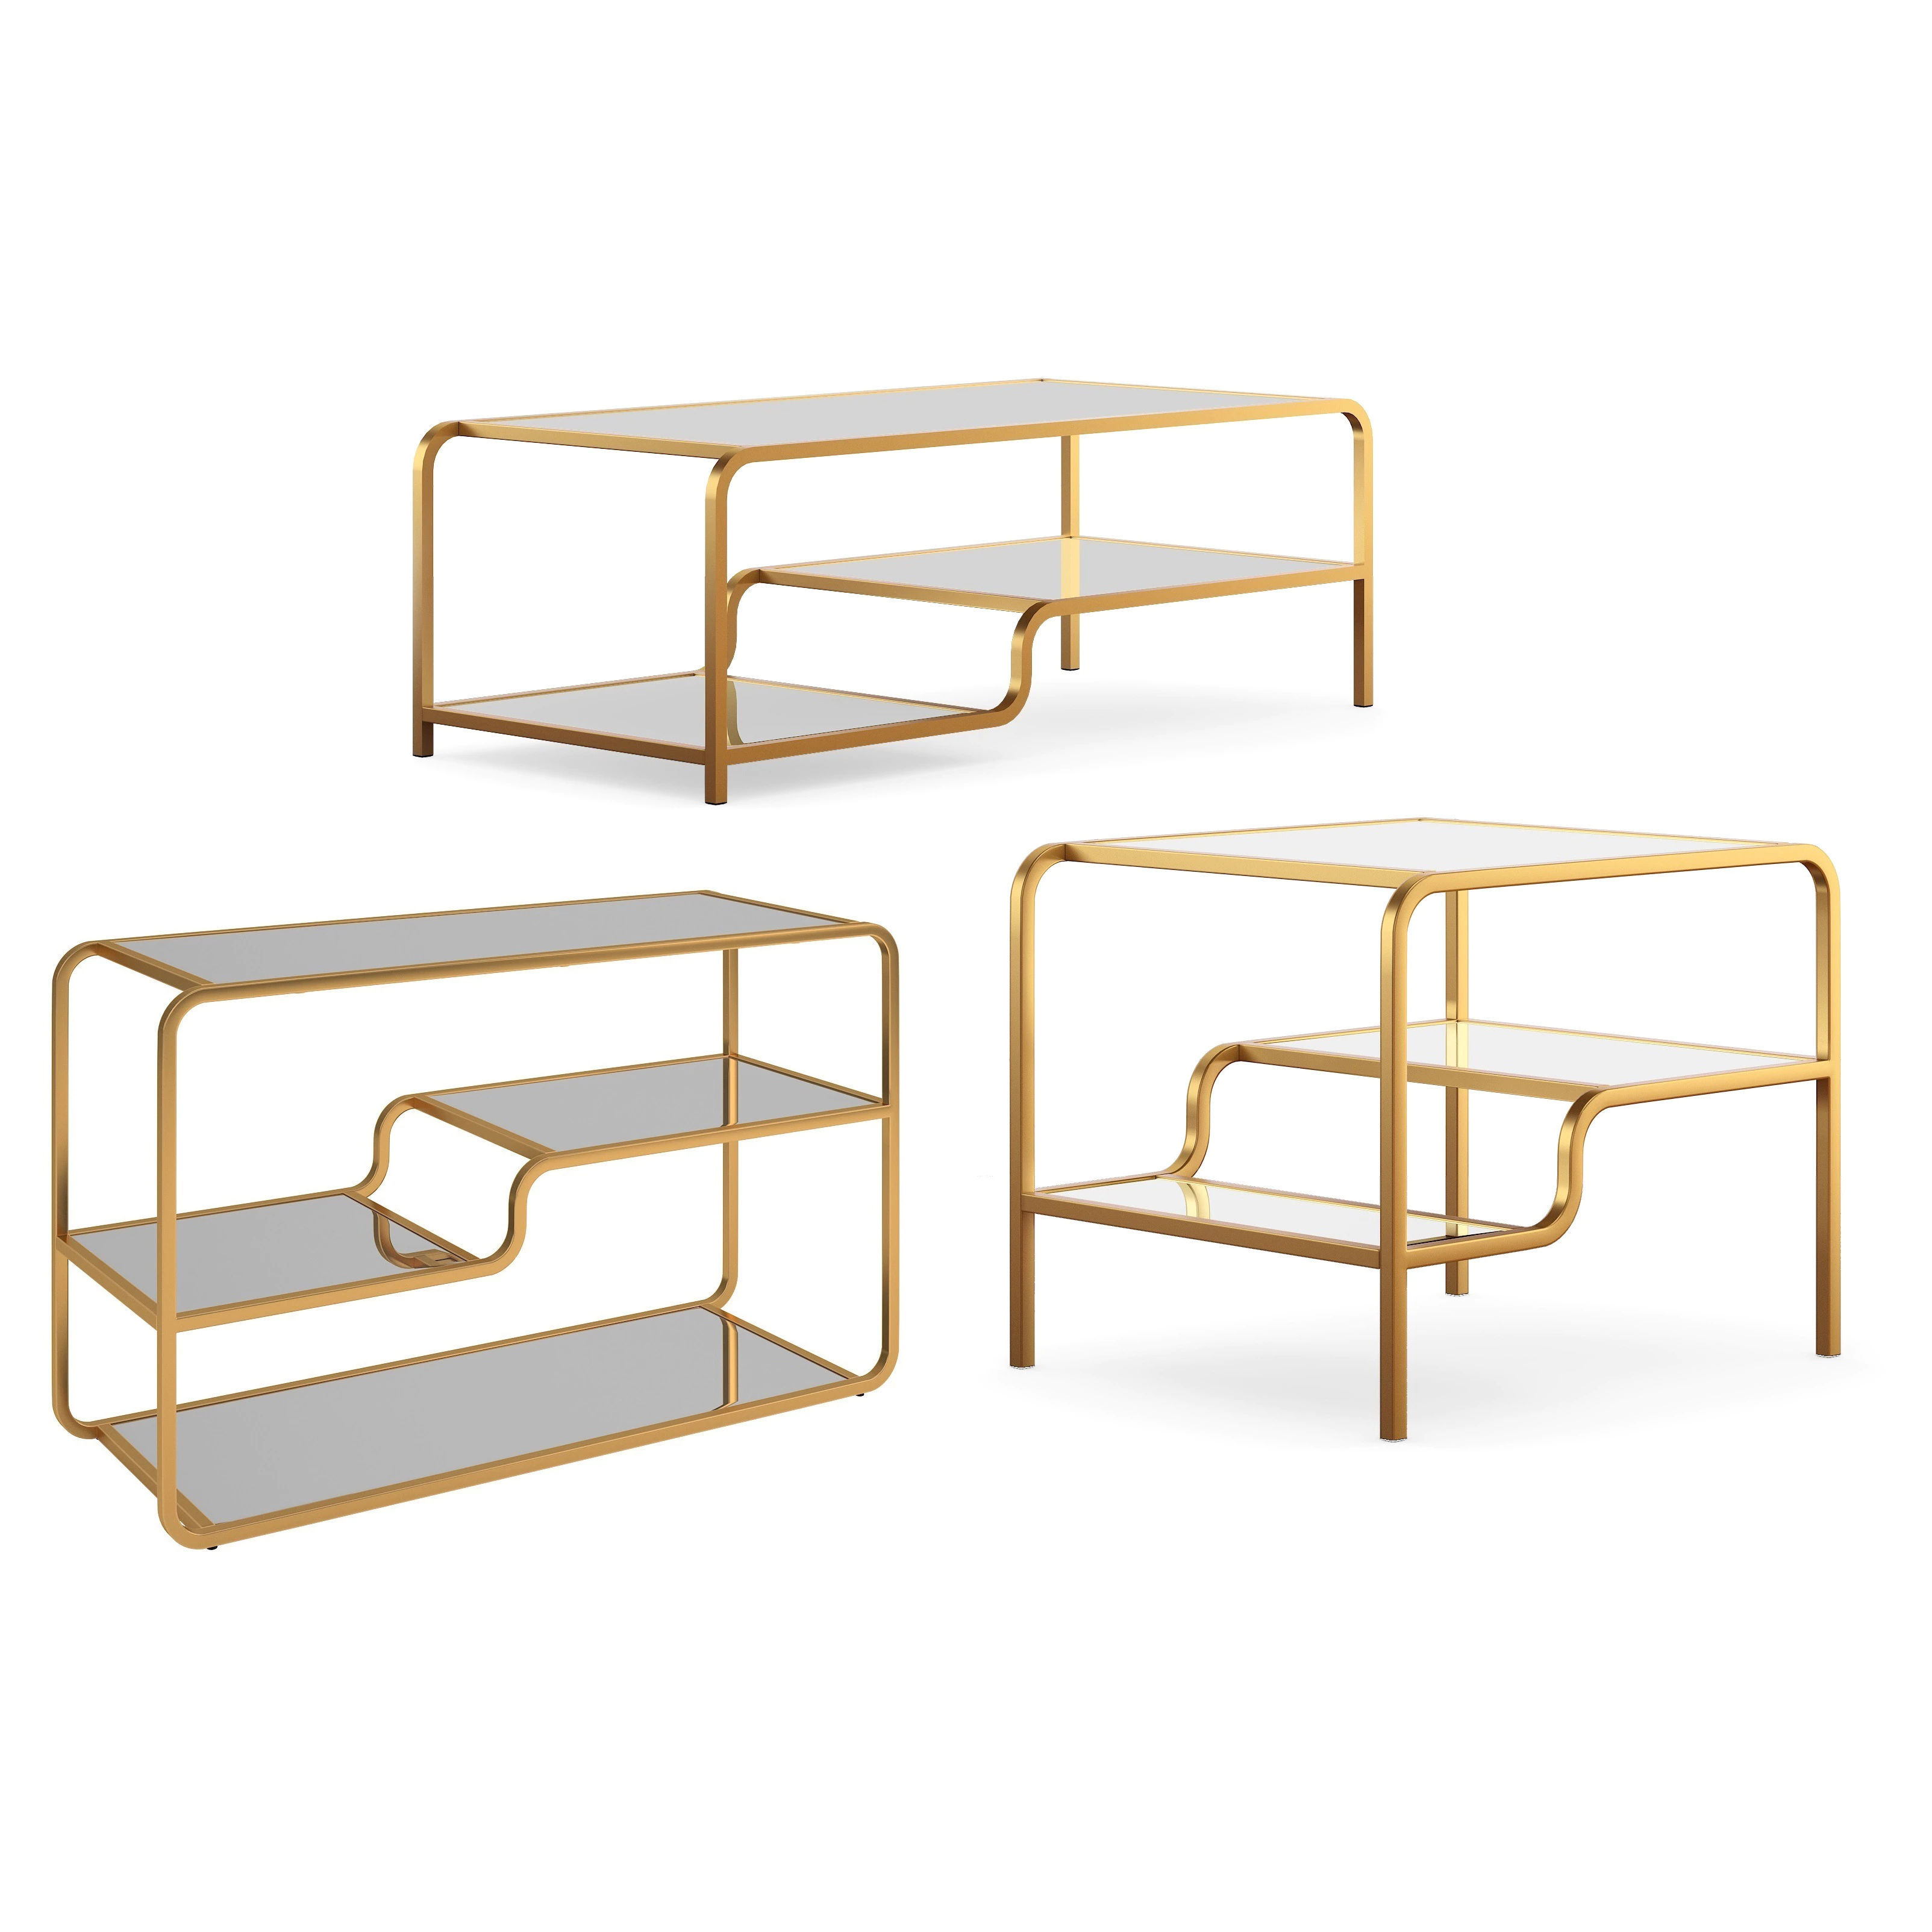 giana champagne gold mirrored shelves accent tables inspire table small outdoor bench cocktail linens cooking oak lamp verizon tablet contemporary dining chairs pedestal ashley